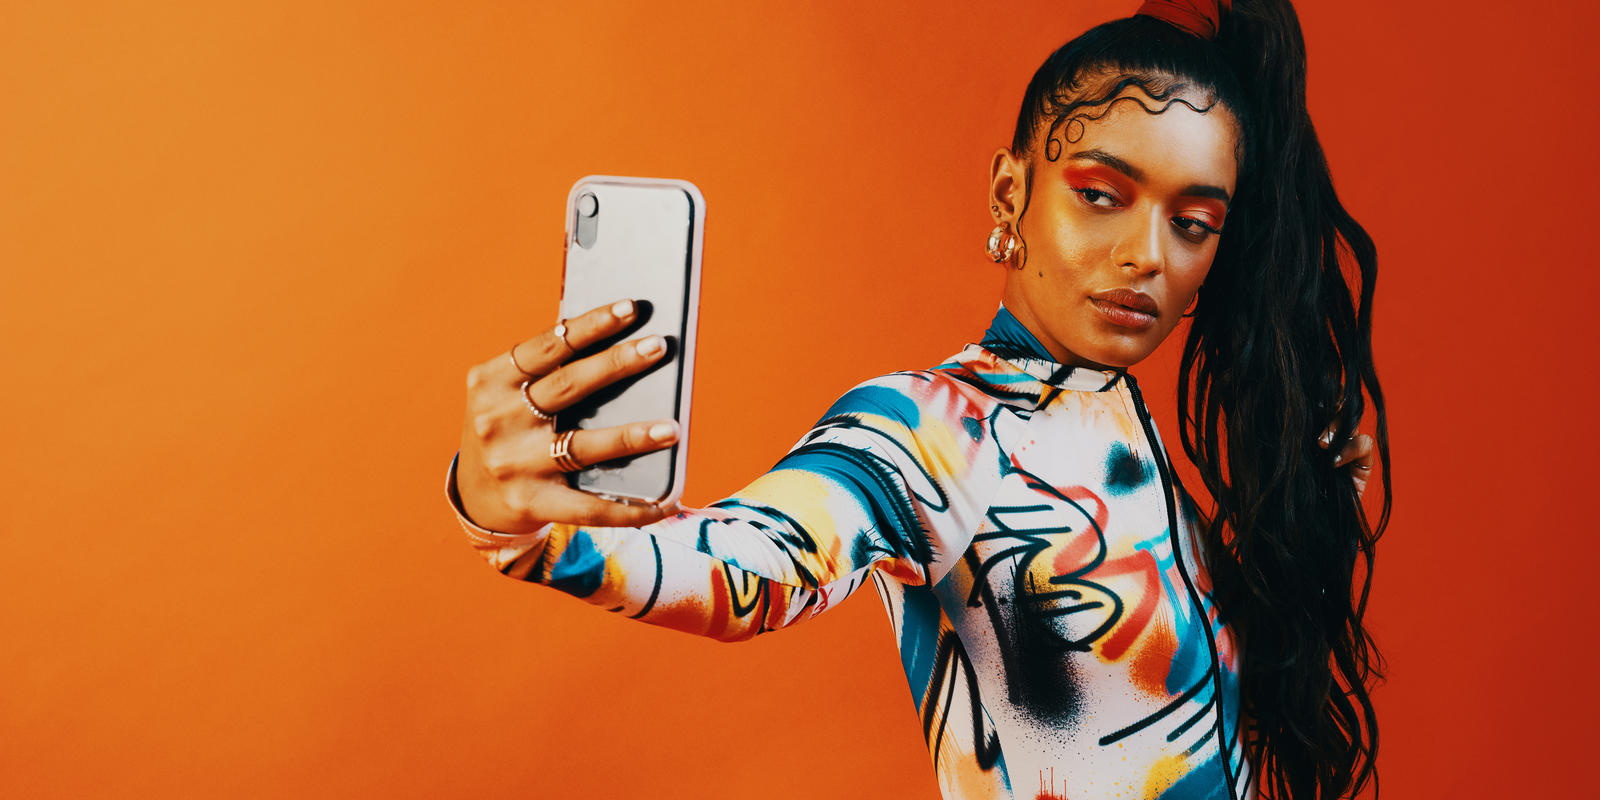 Woman holding phone is outstretched arm, as if she's taking a selfie. She stands in front of a bright orange backdrop.